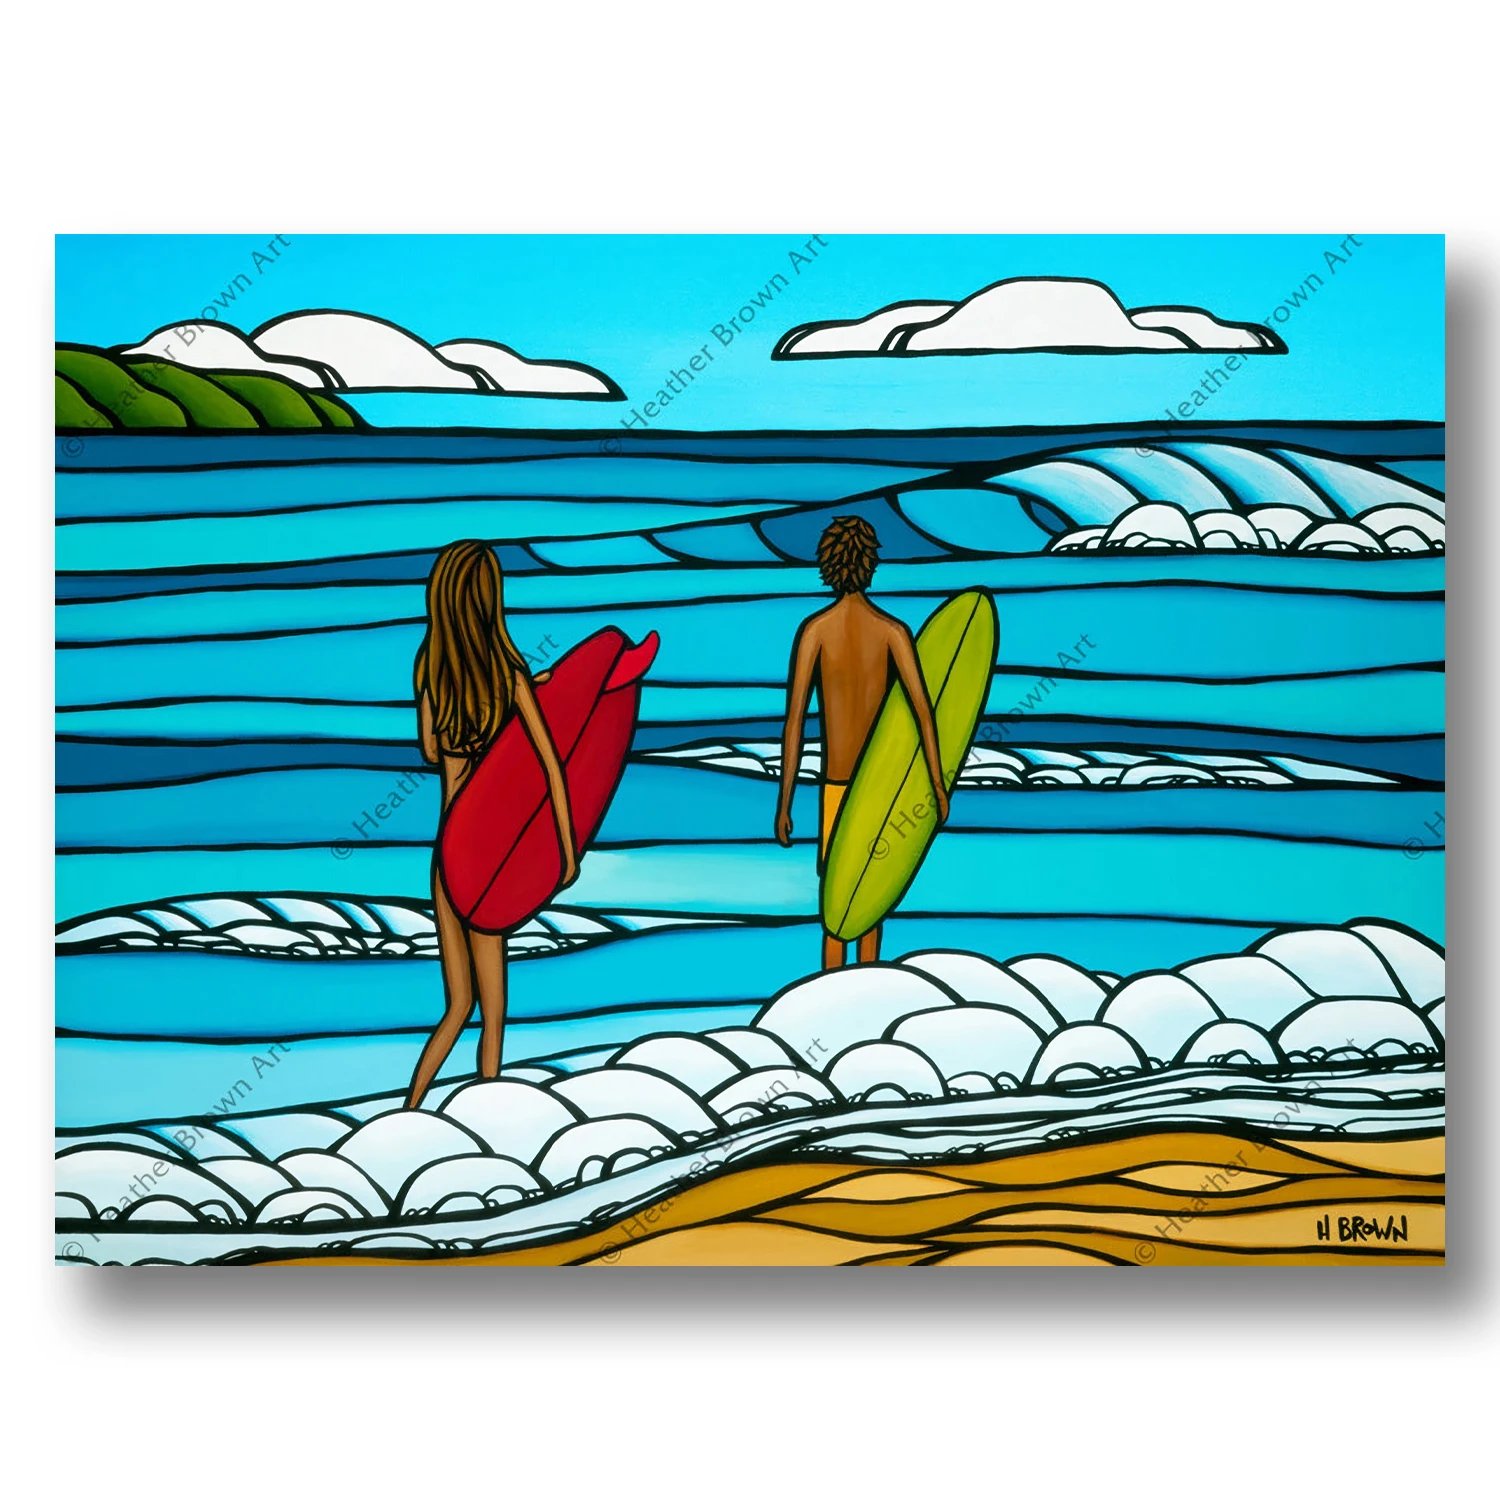 LOVE AND SURF / Heather Brown（ヘザーブラウン）のOpen Canvas通販 | GREENROOM GALLERY